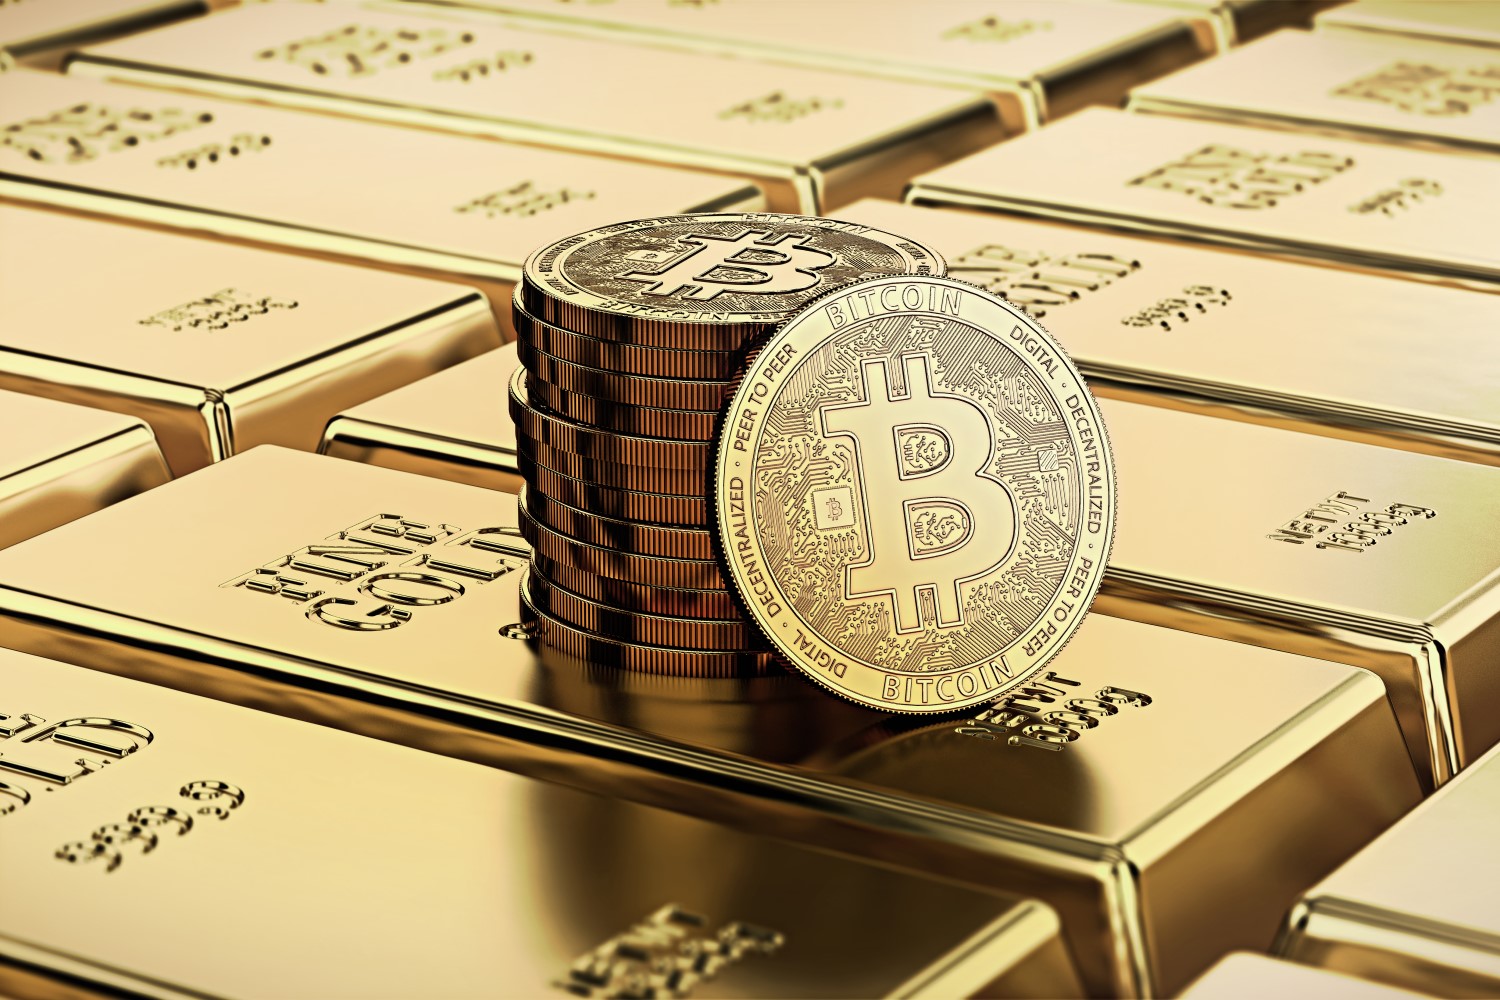 Cryptos ‘Not A Substitute’ For The Precious Metal, Says World Gold Council